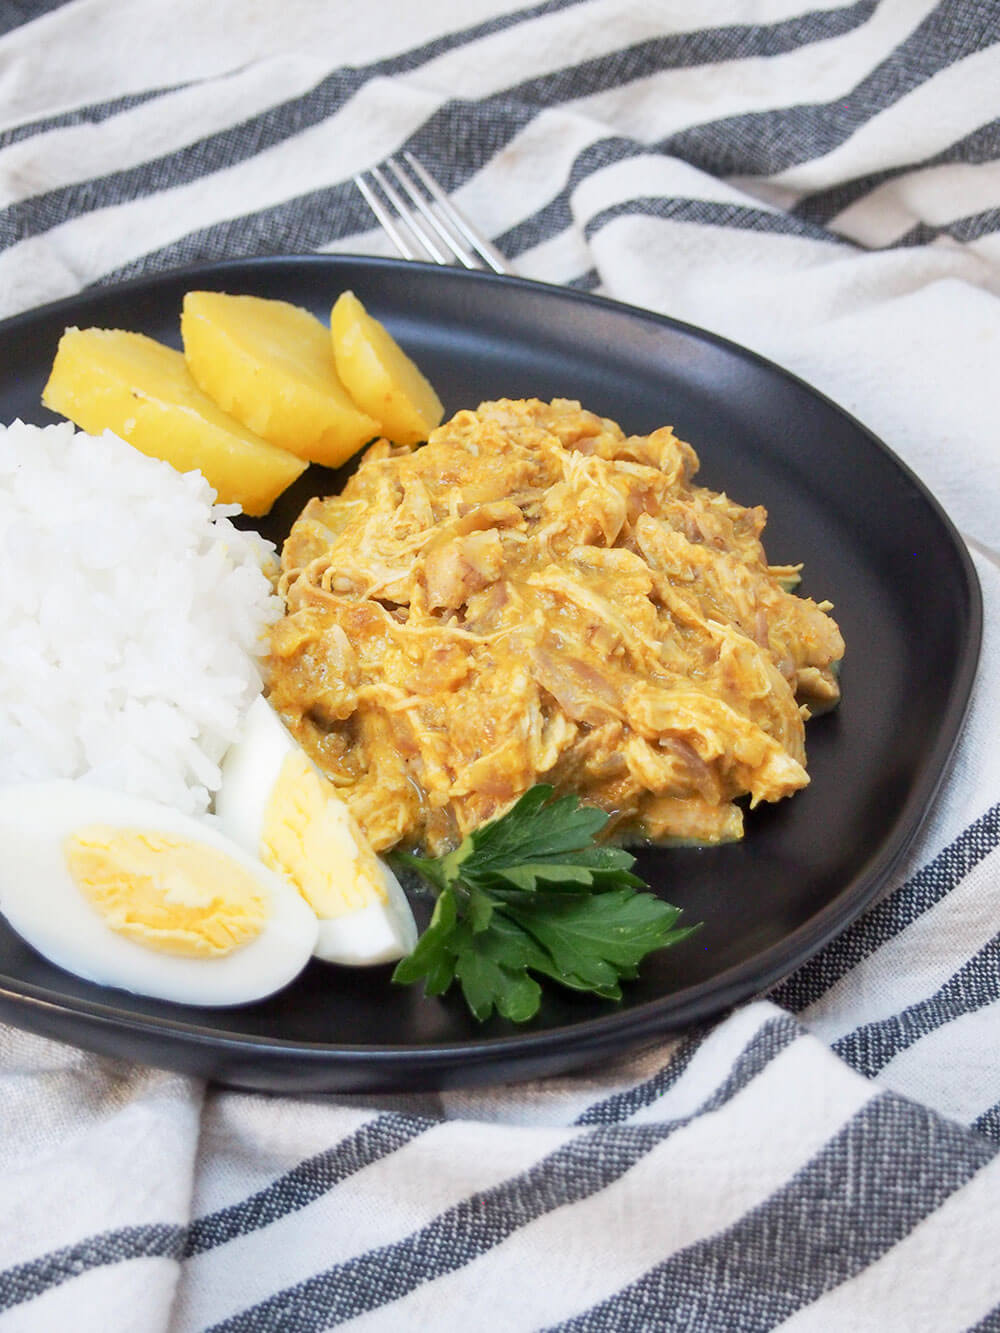 Aji de gallina (Peruvian chicken) with rice, egg and potatoes on side, all on black plate